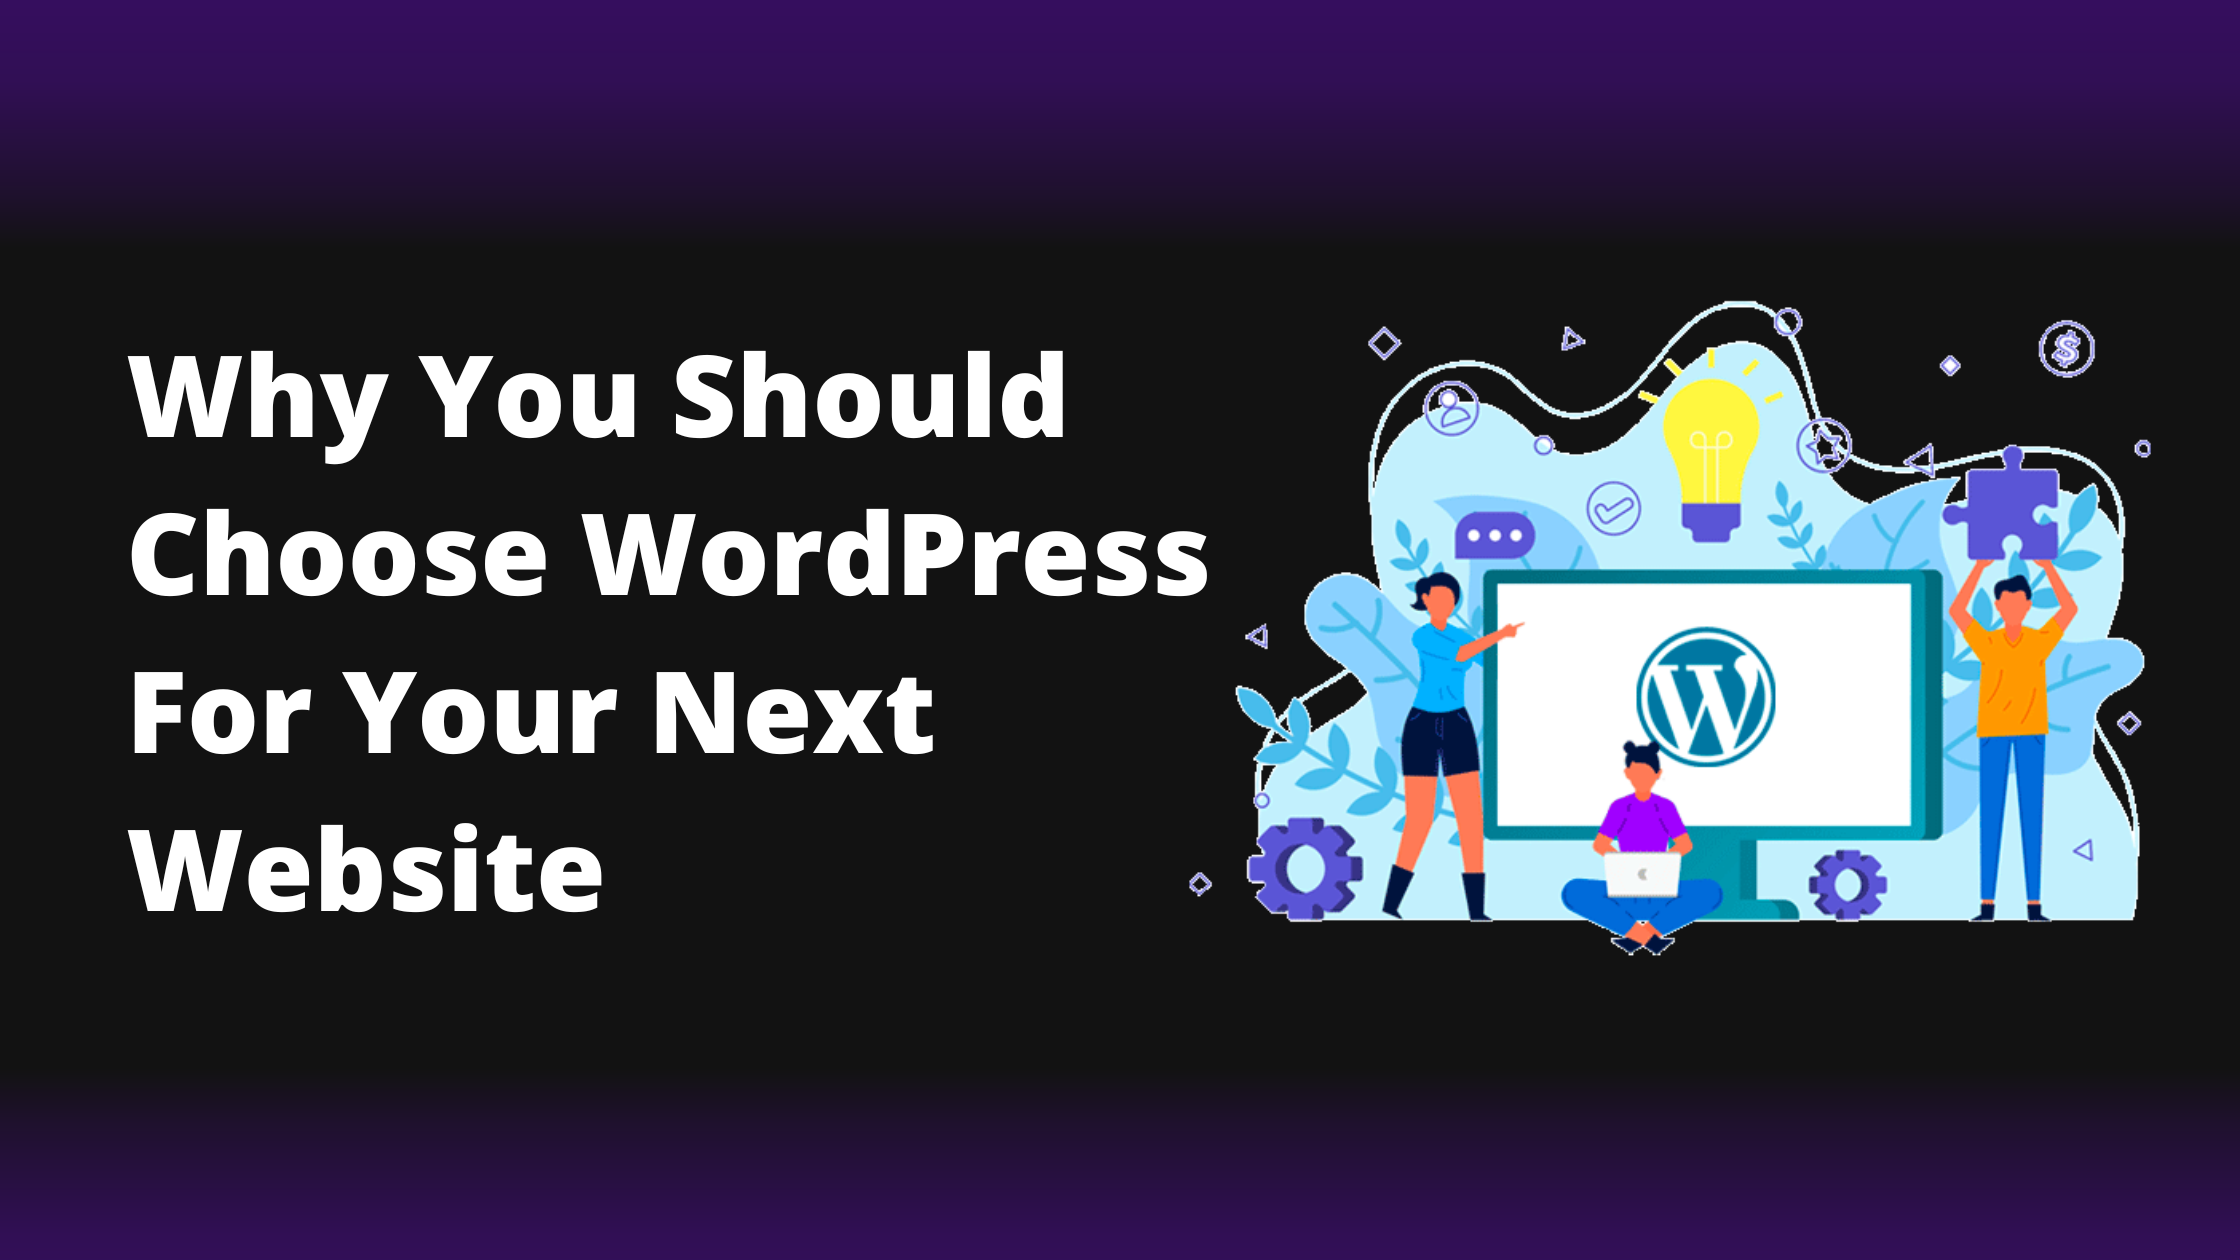 5 Reasons Why You Should Choose WordPress for Your Next Website